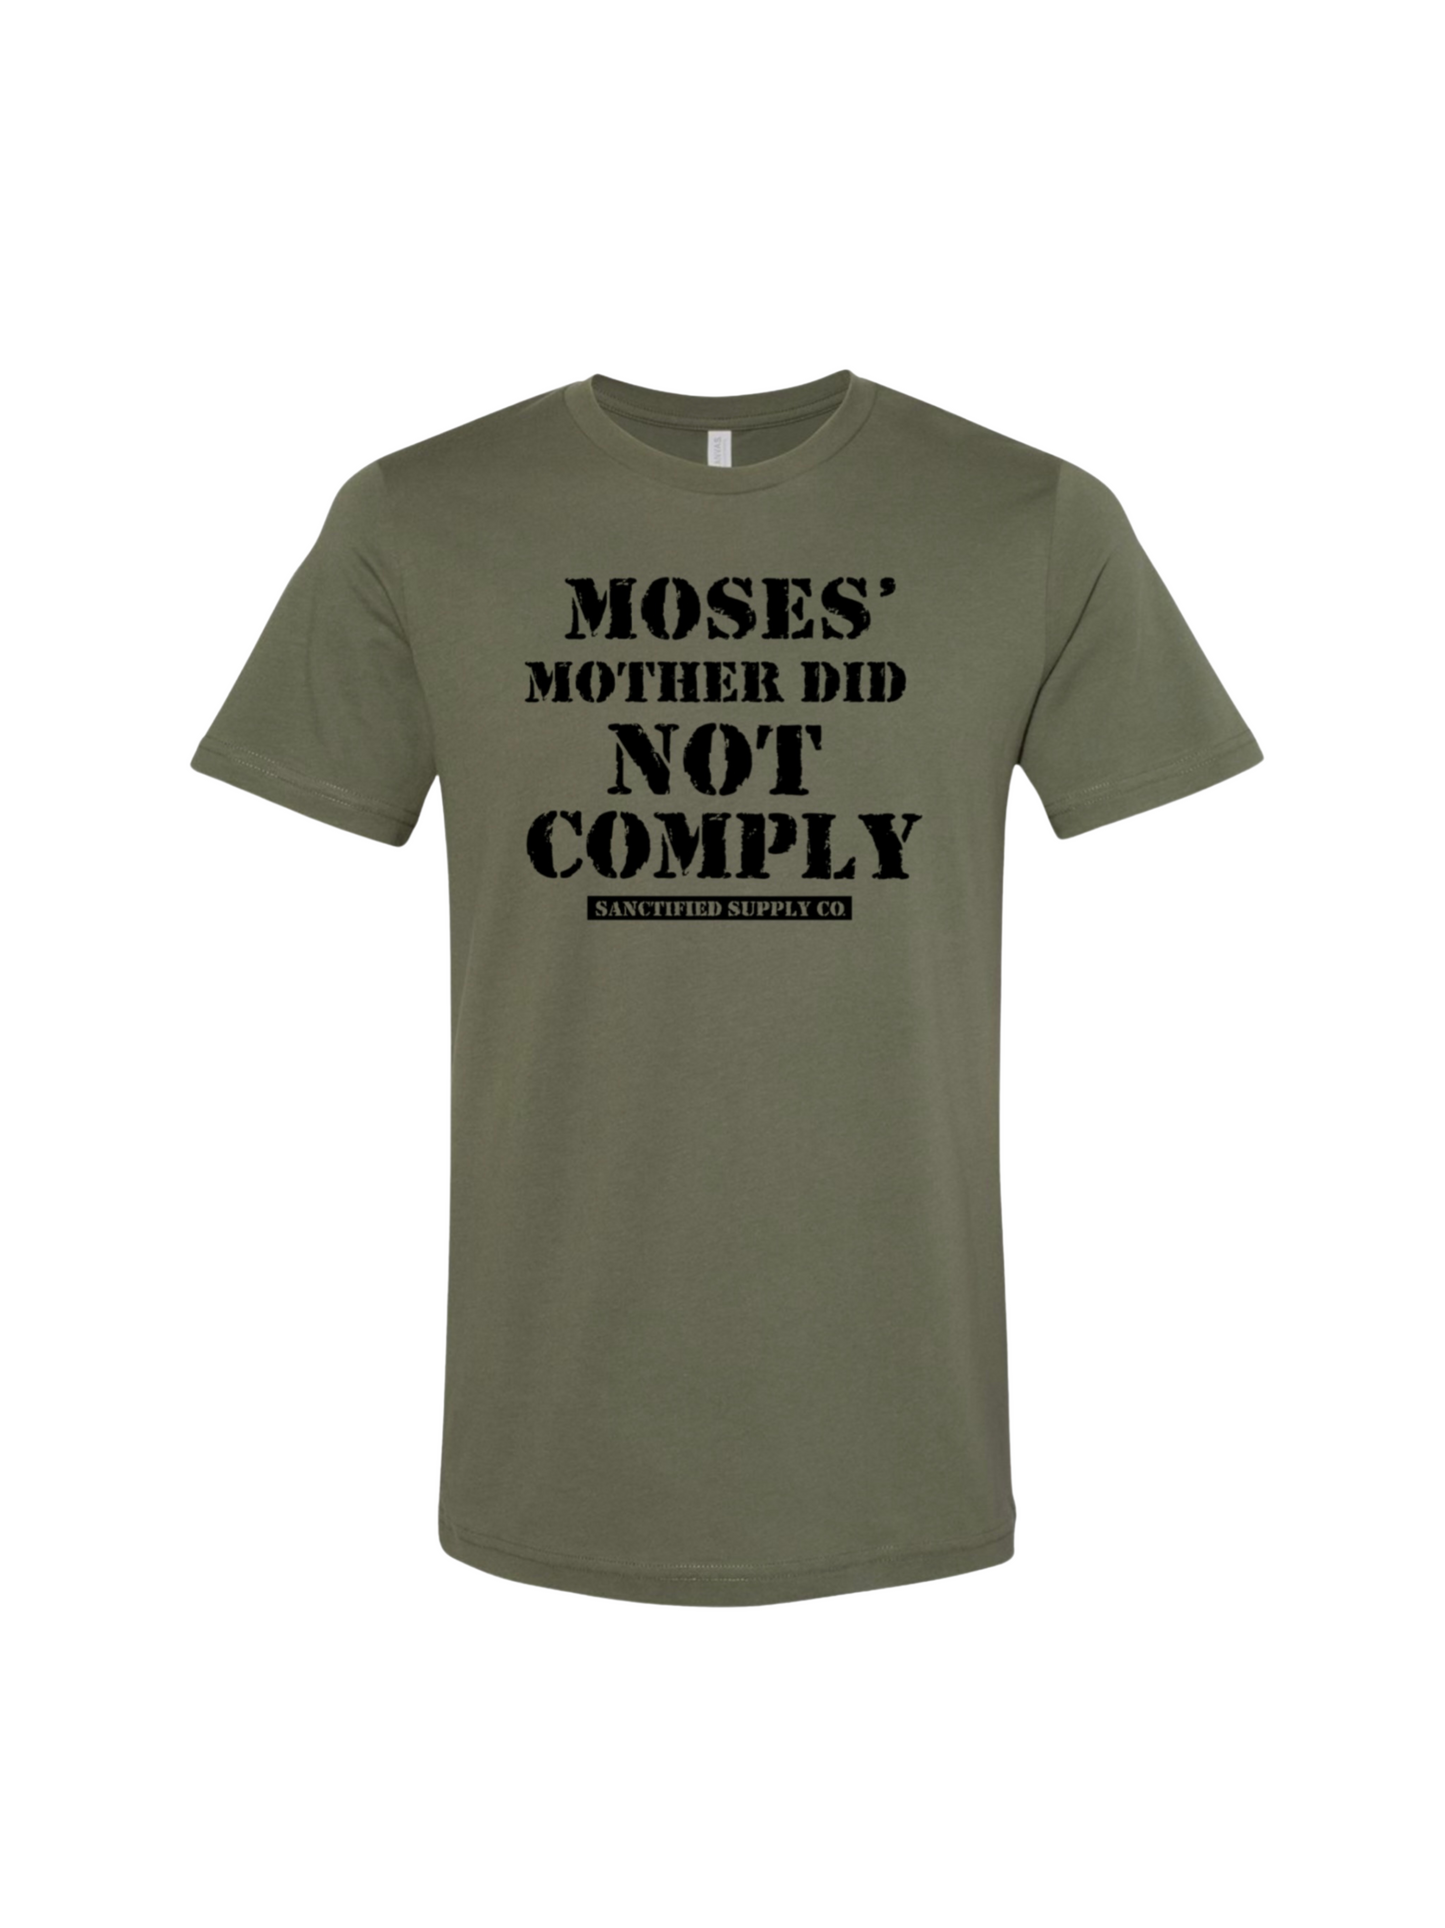 Moses’ Mother Did Not Comply T-Shirt